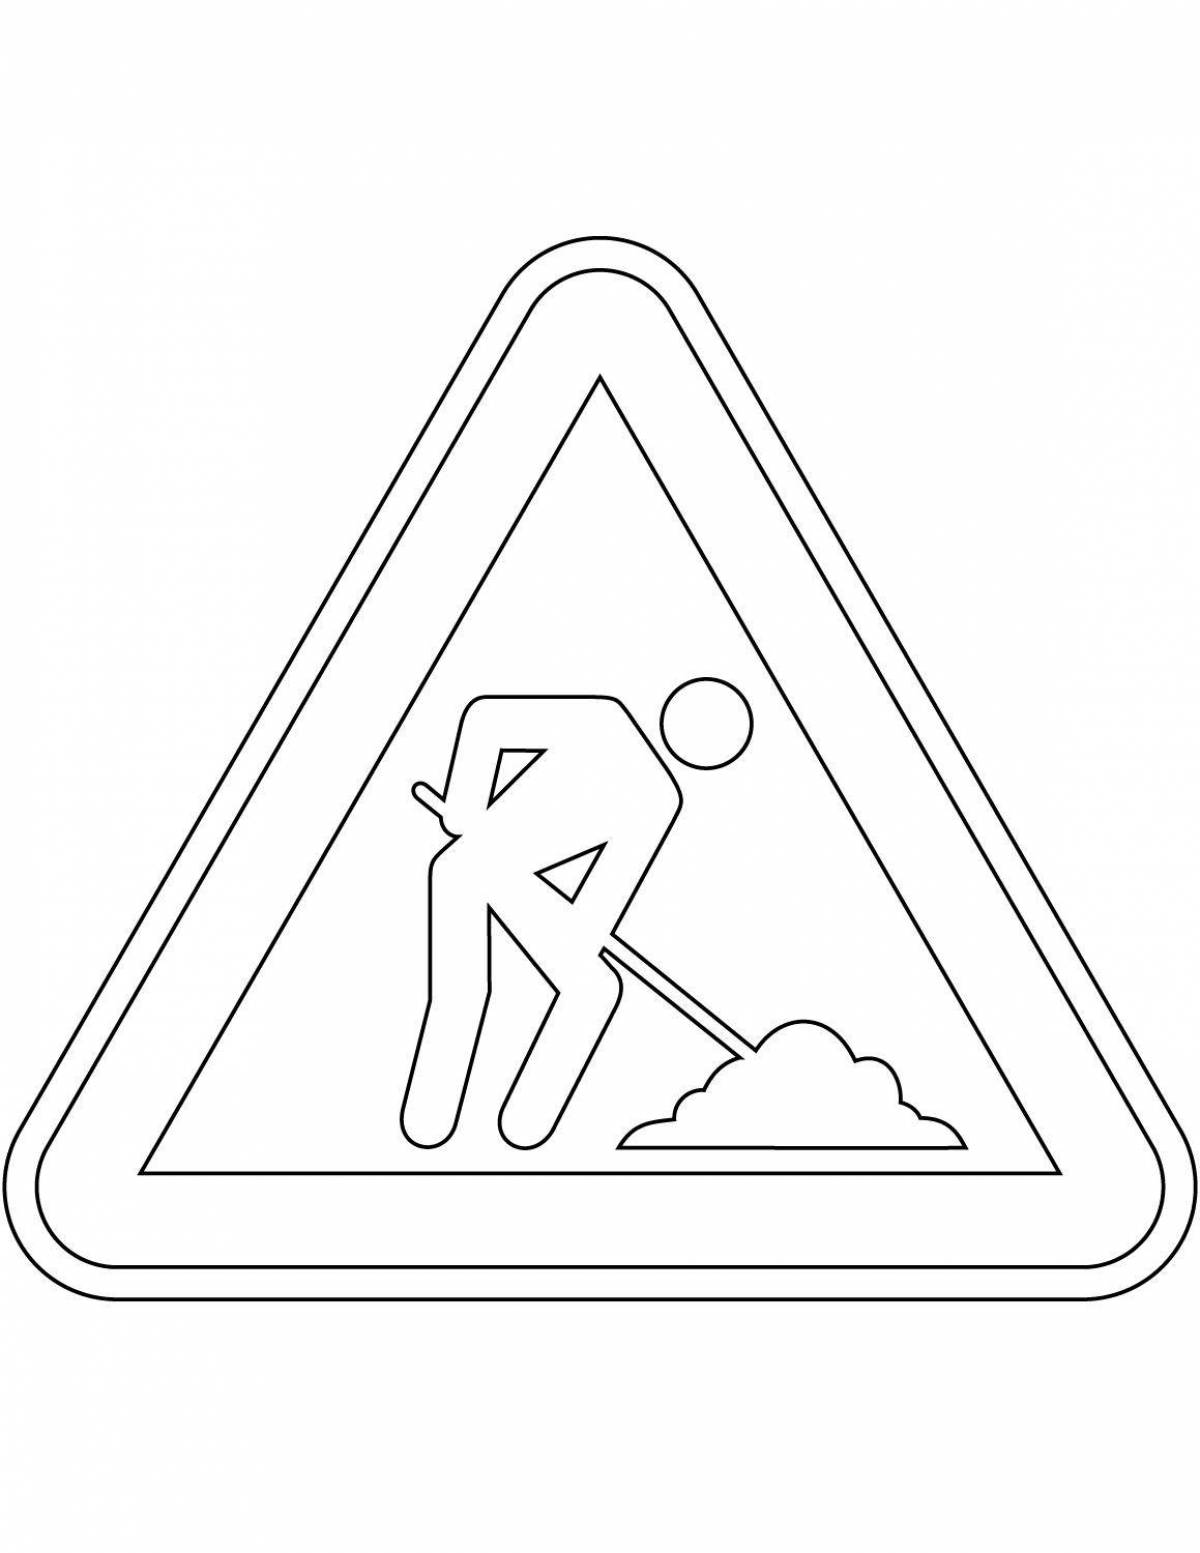 Coloring page beaded daring caution sign